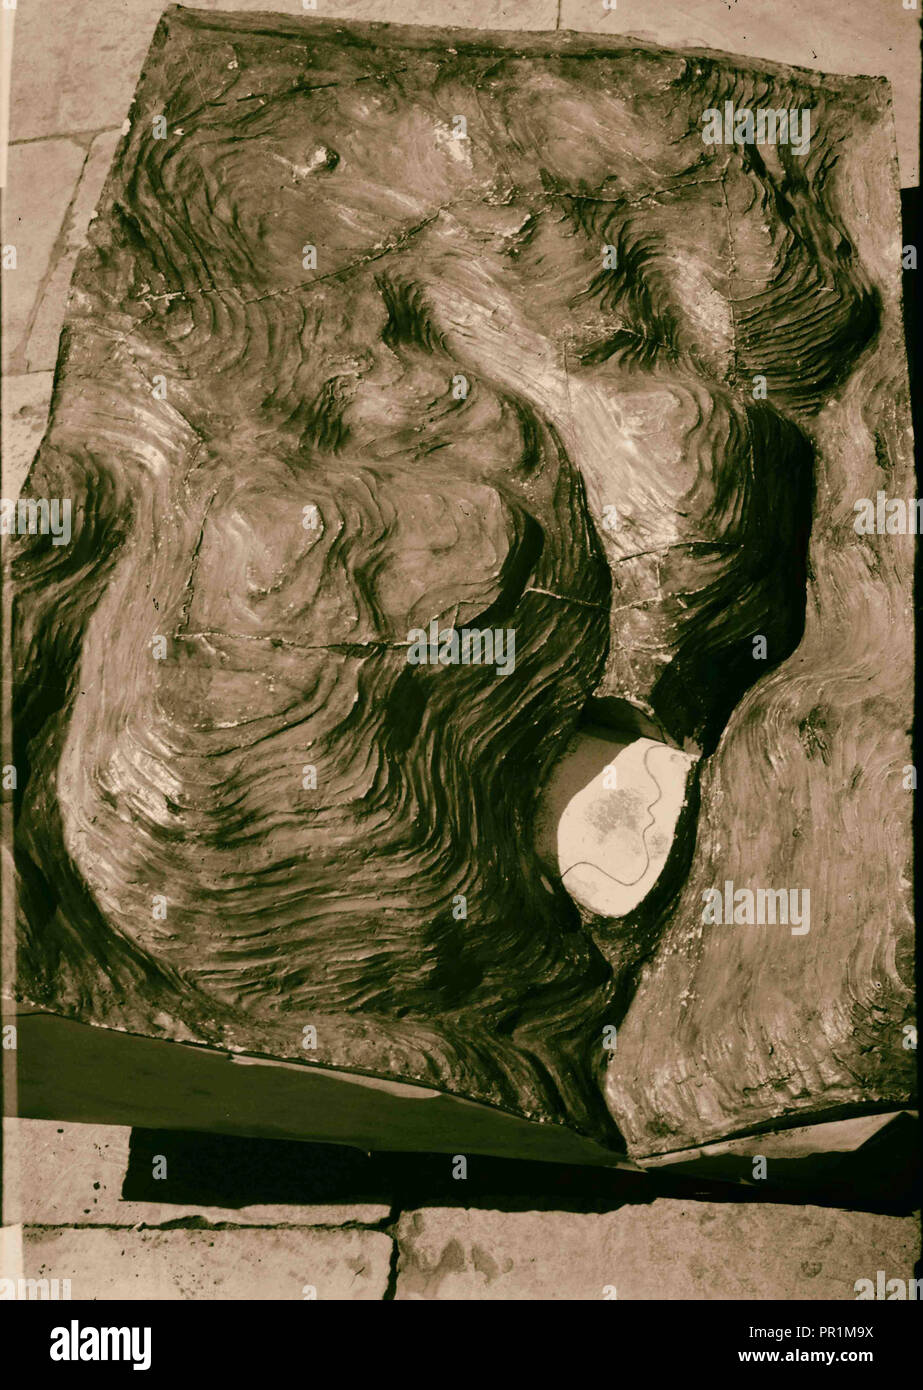 Copy Of Relief Map Showing Original Topography Of Jerusalem With